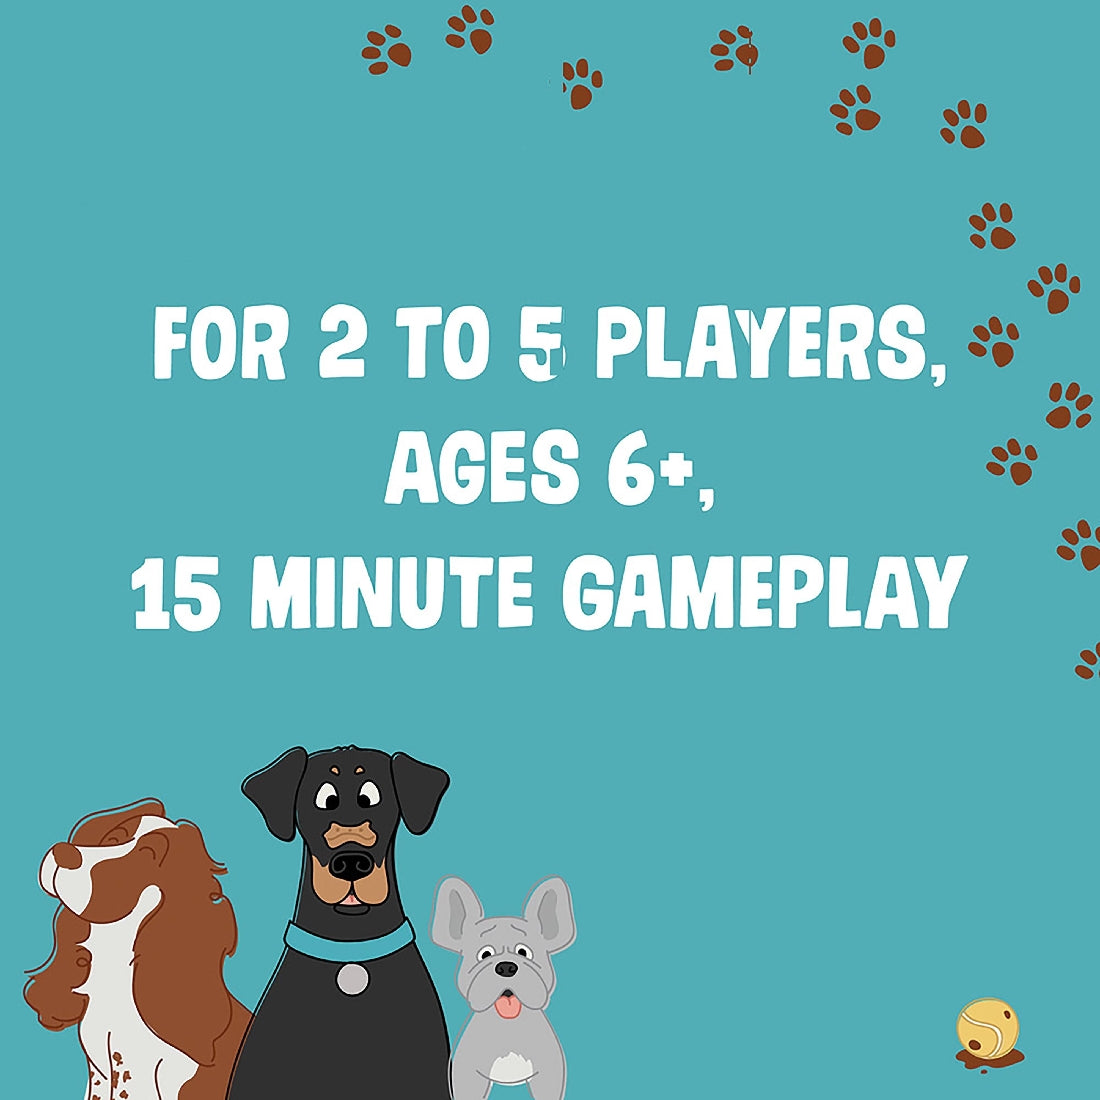 TOP DOGS FAMILY CARD GAME